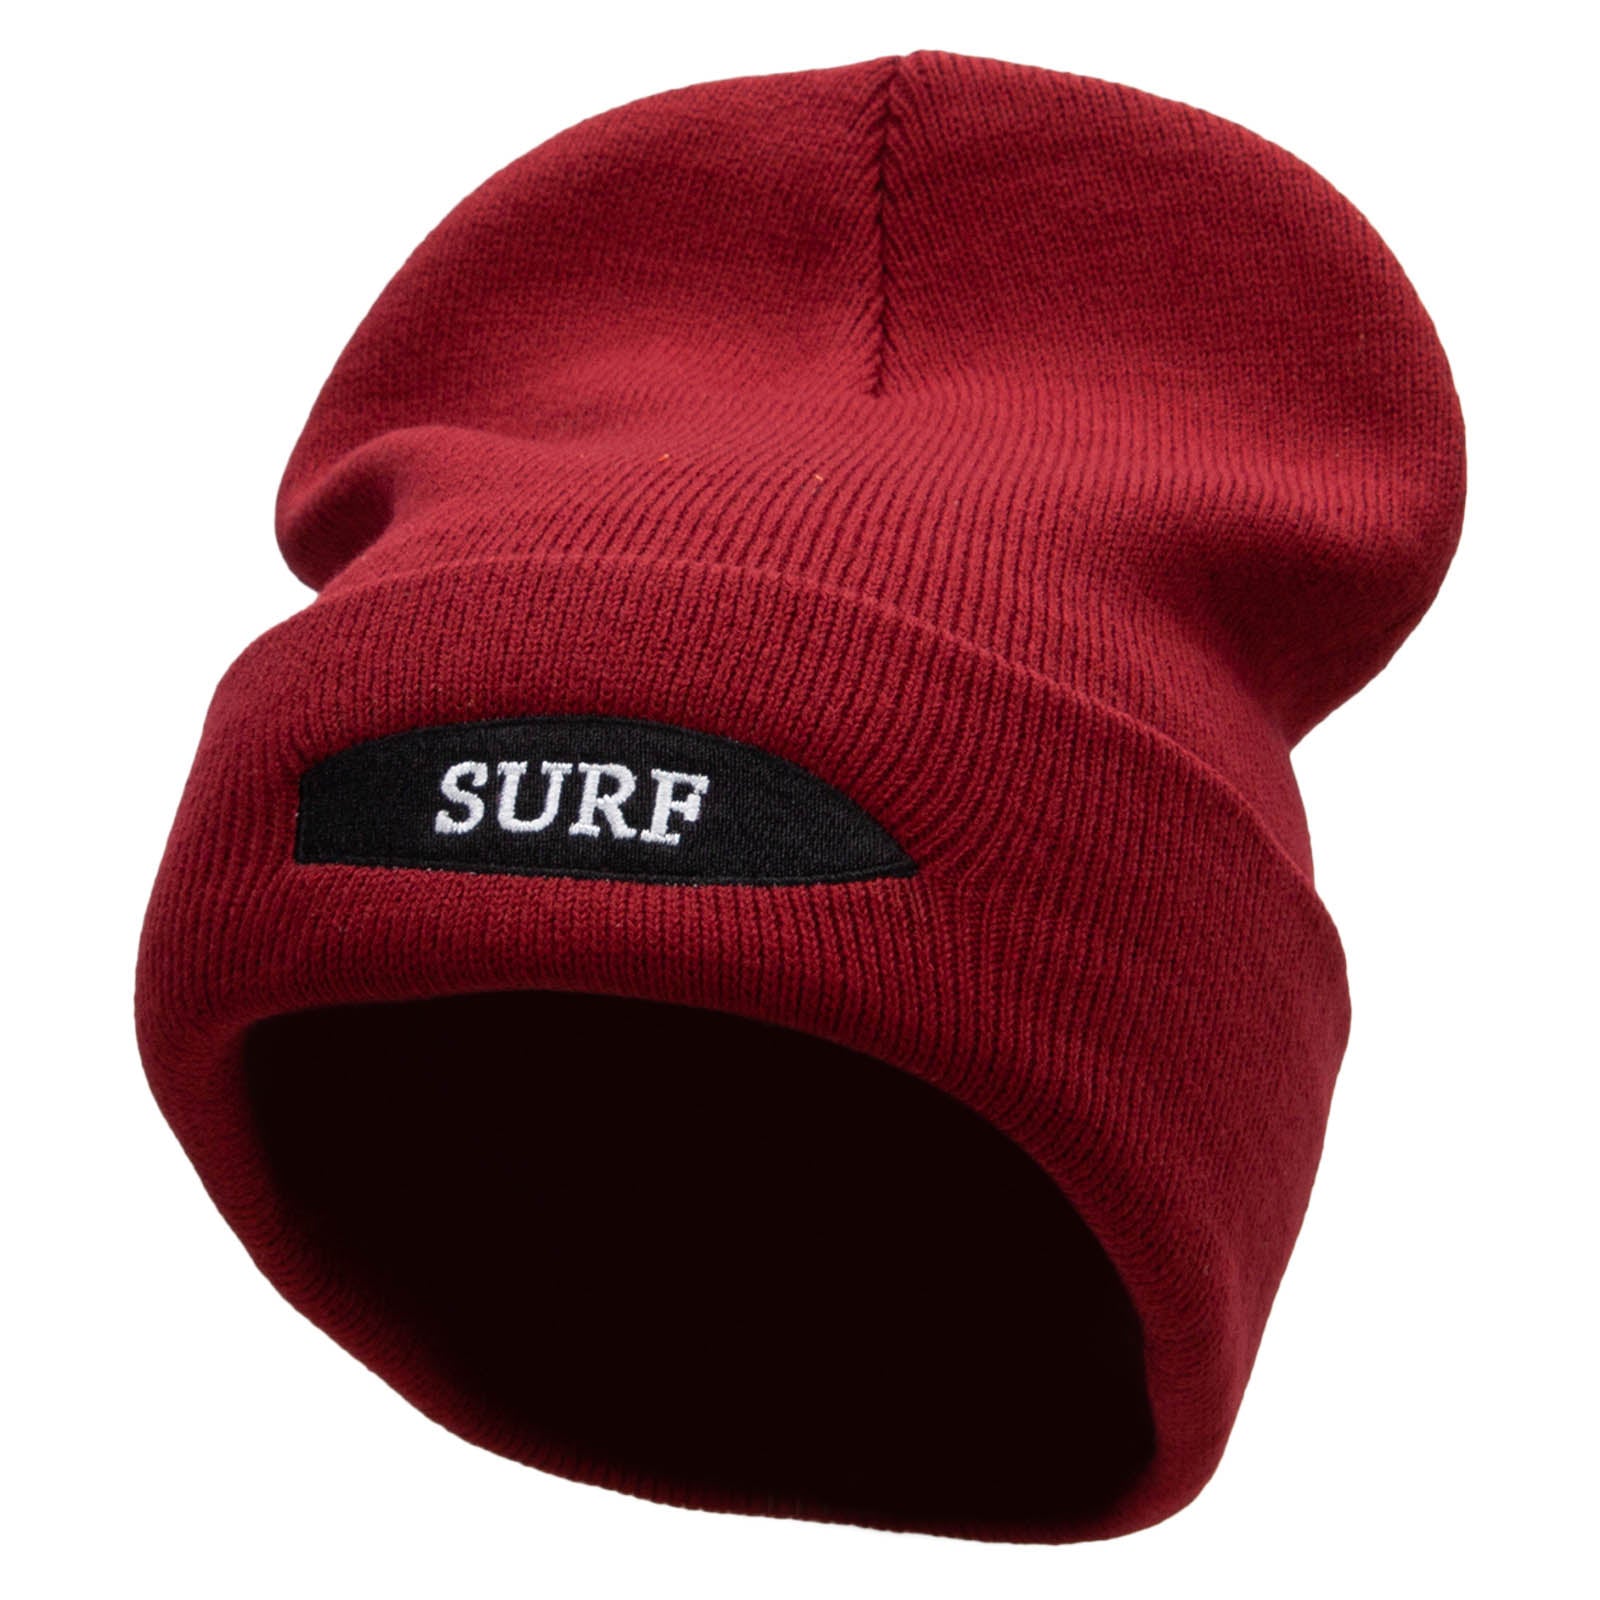 Surfboard Embroidered 12 Inch Long Knitted Beanie - Maroon OSFM